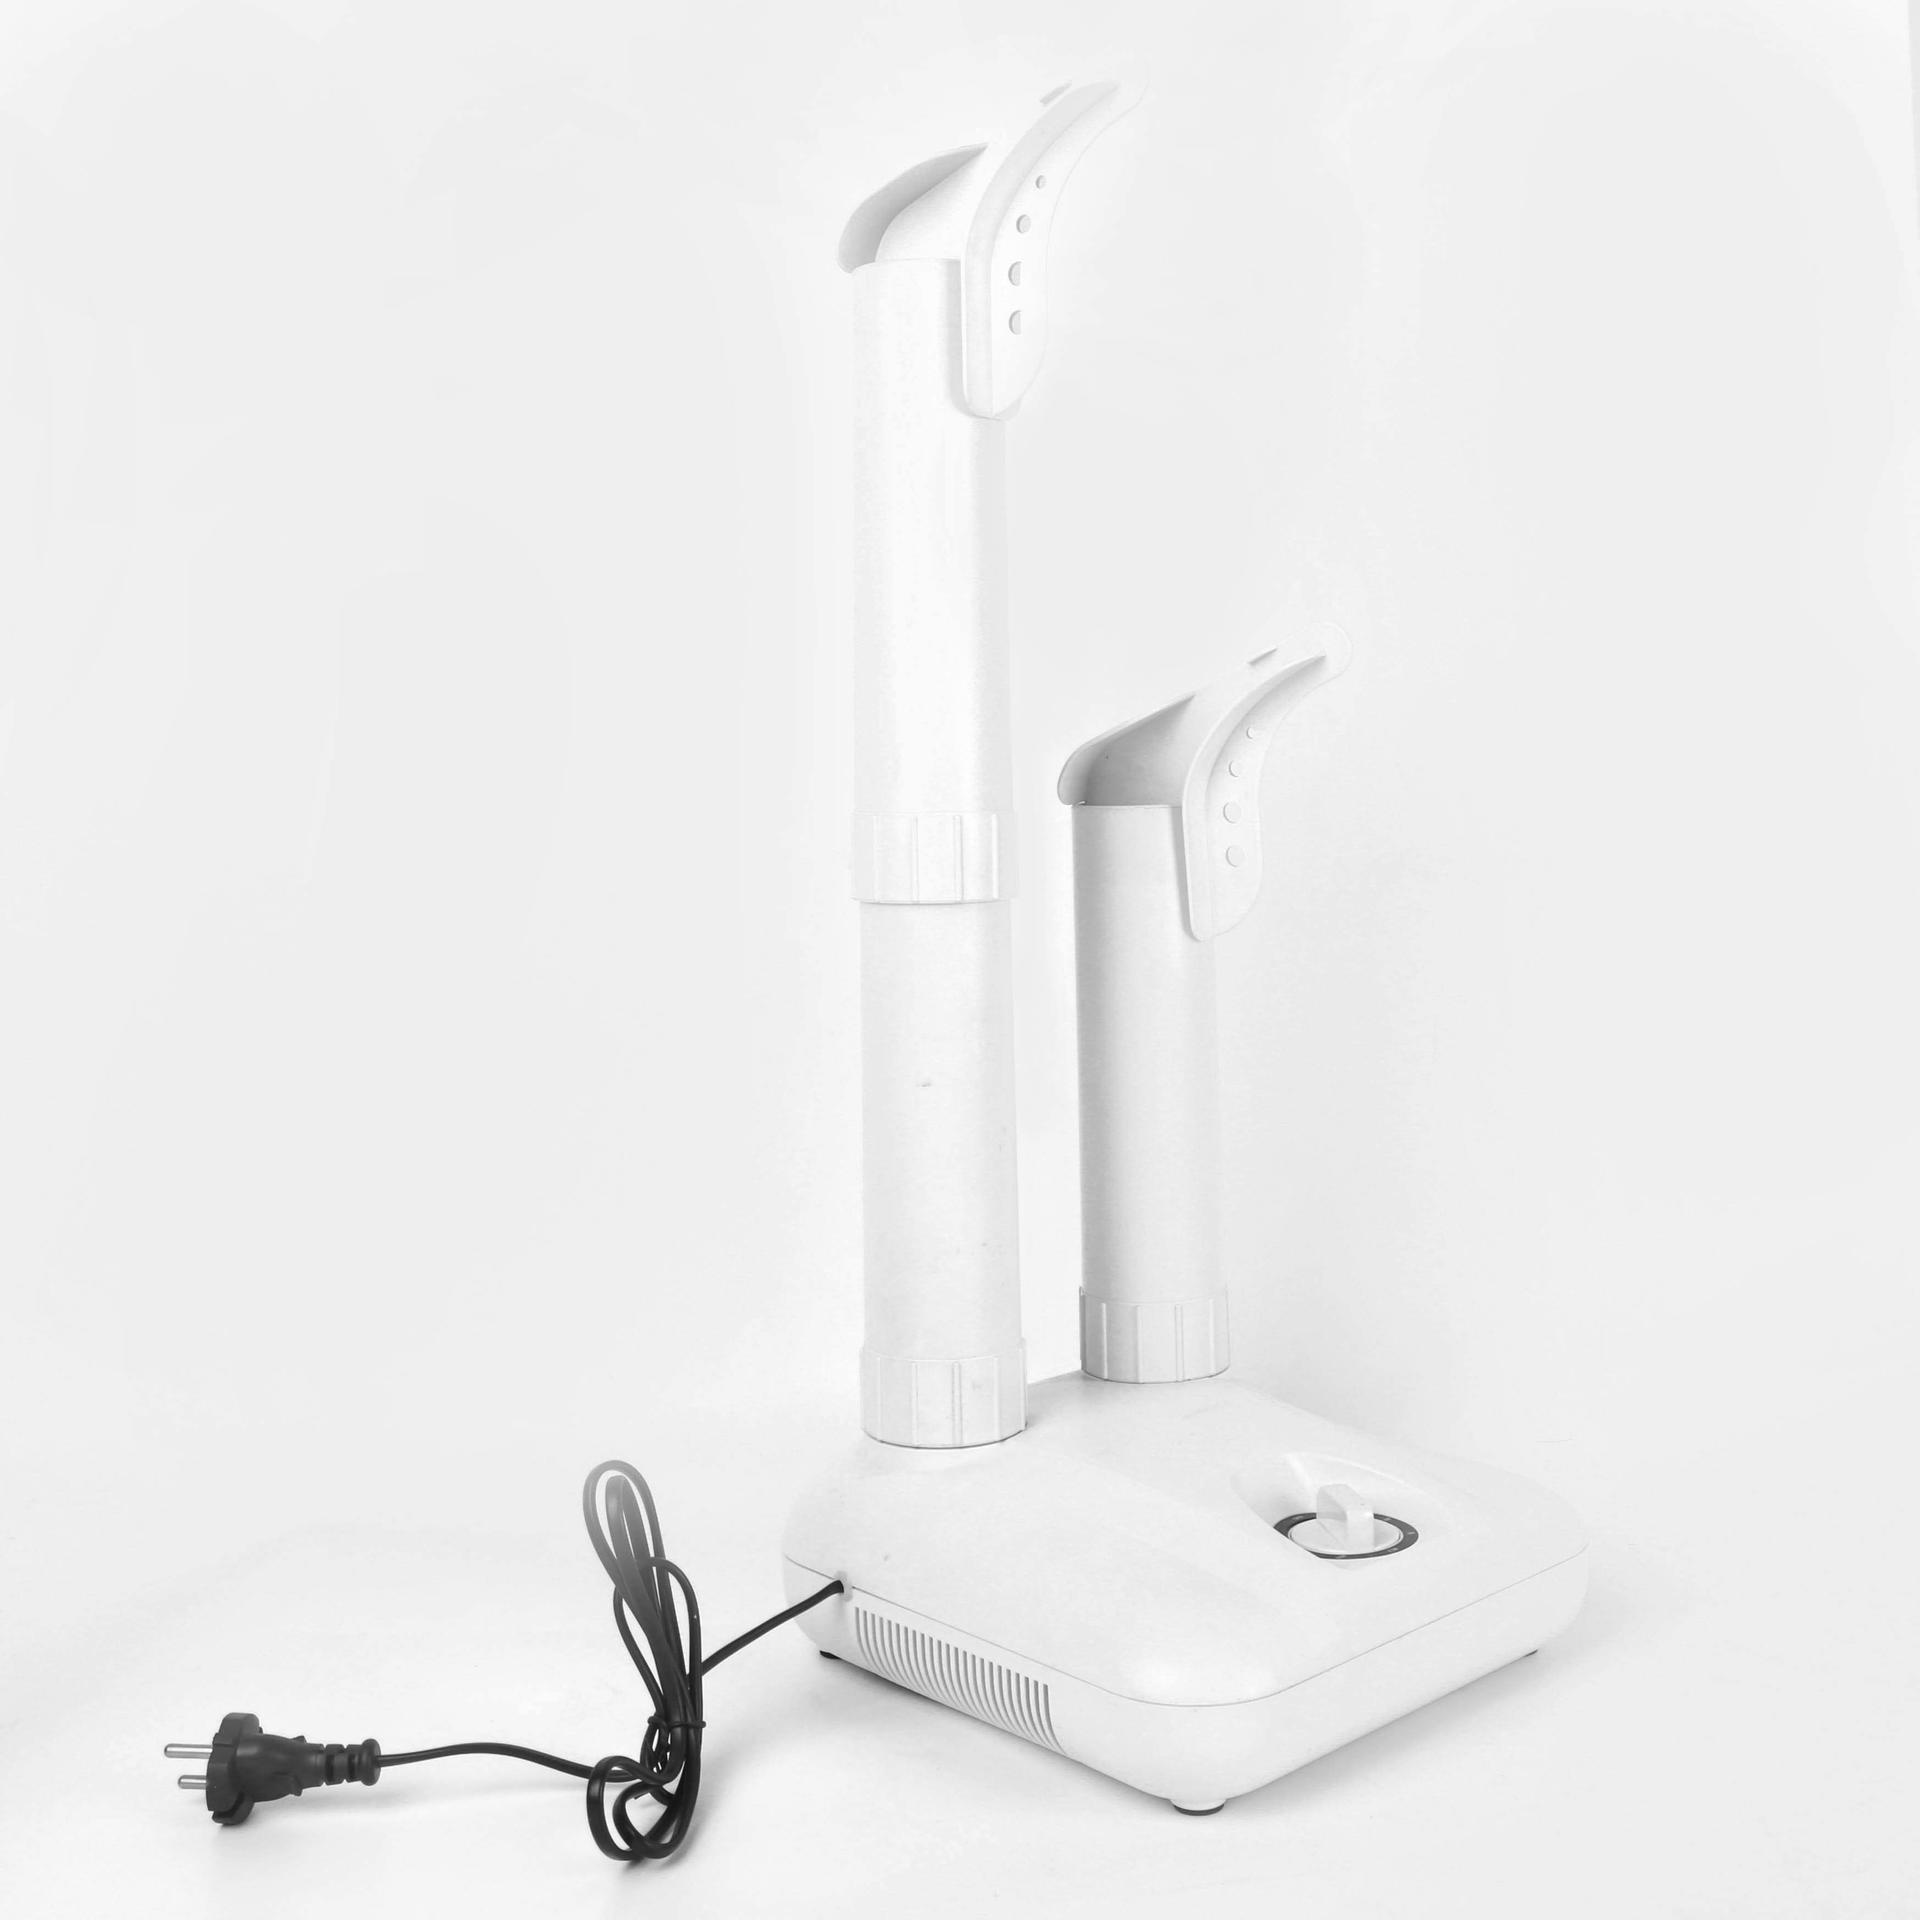 ODM shoe dryer order now for face care